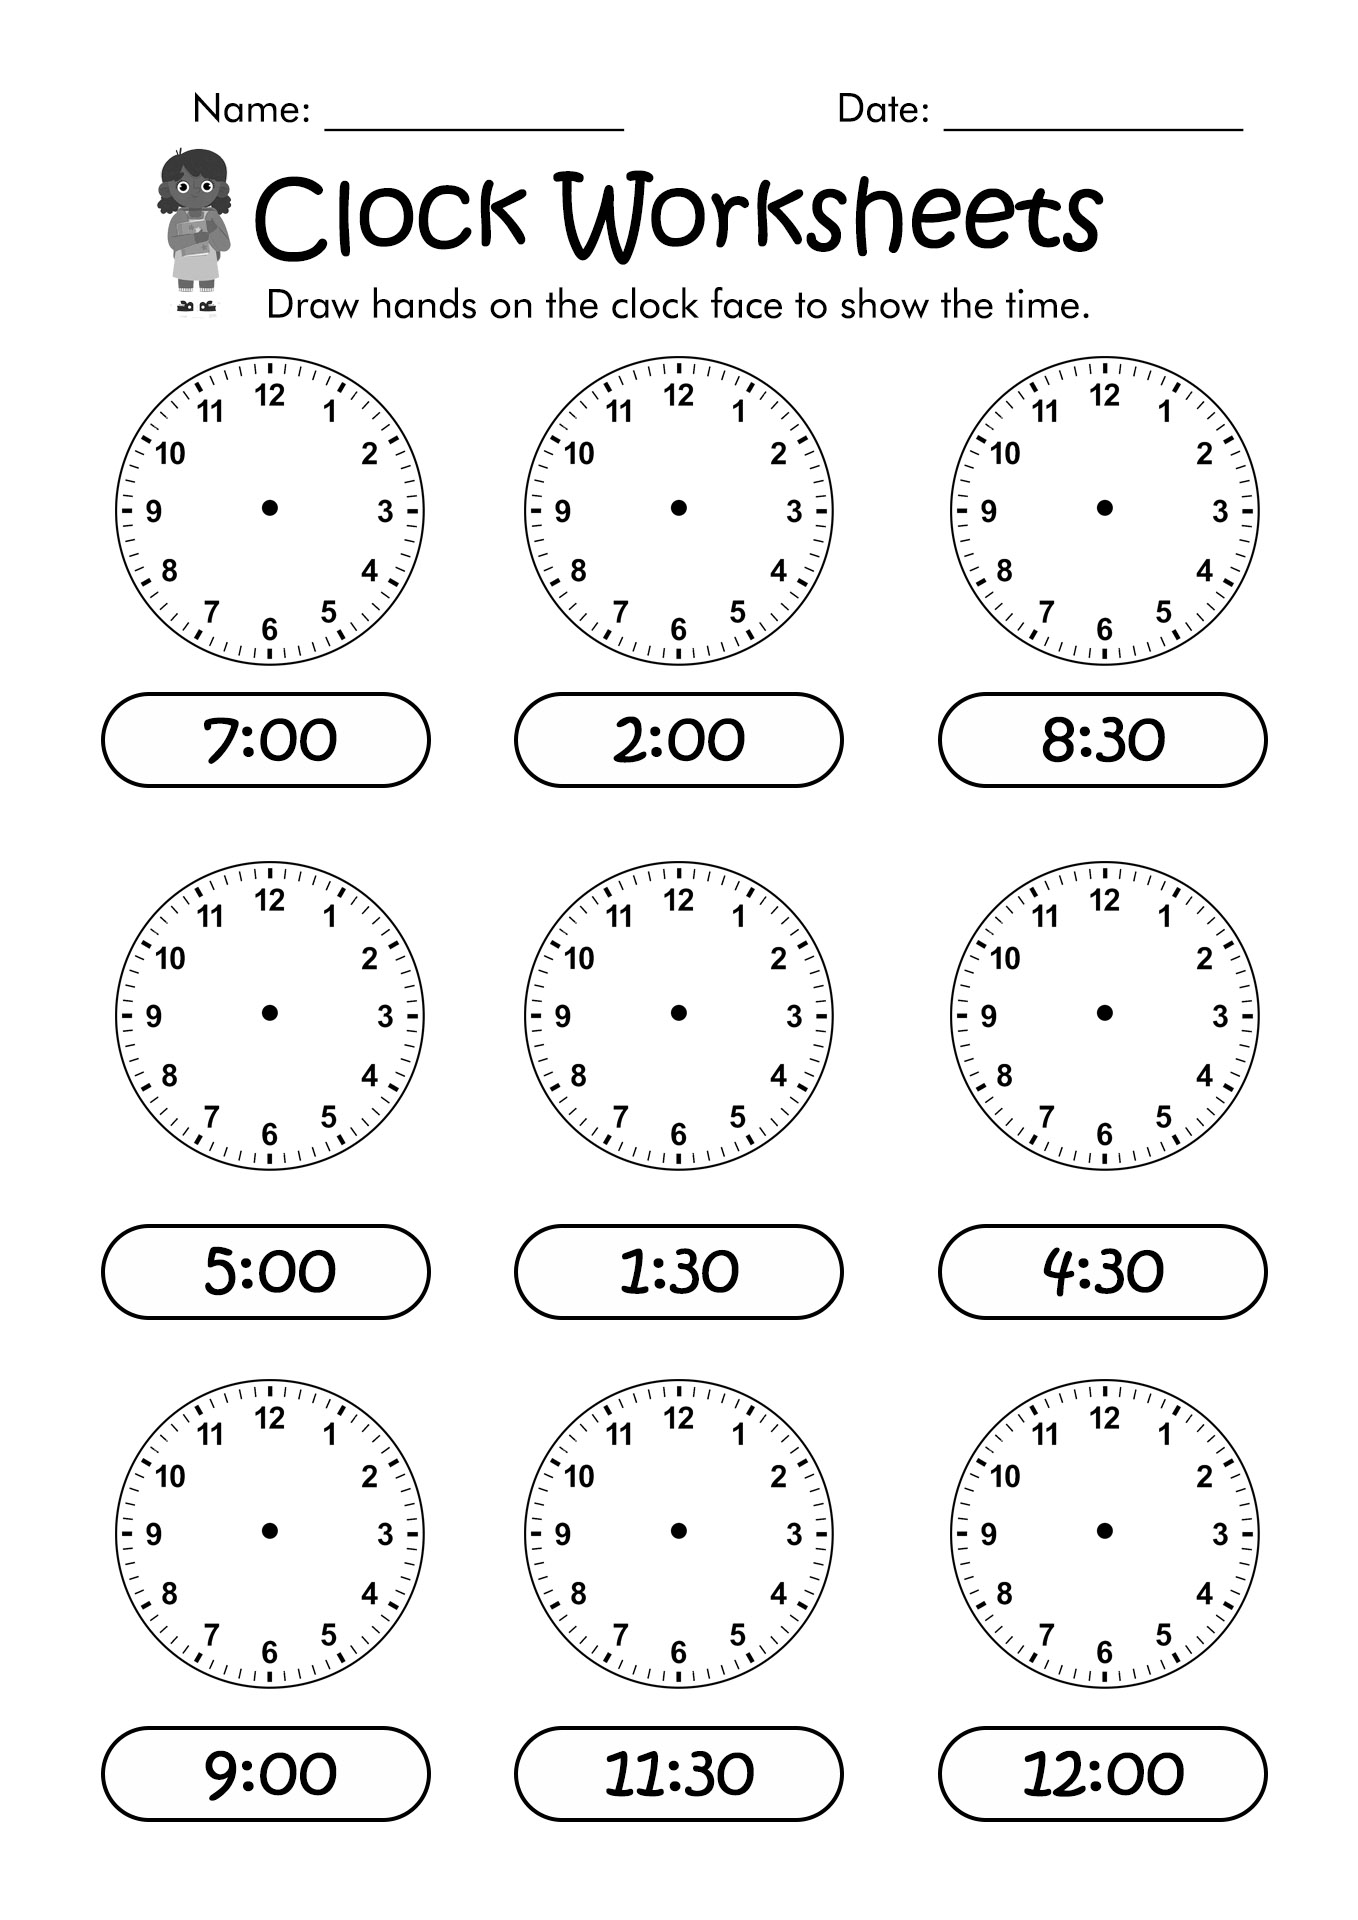 12-best-images-of-clock-cut-out-worksheet-grouchy-ladybug-clock